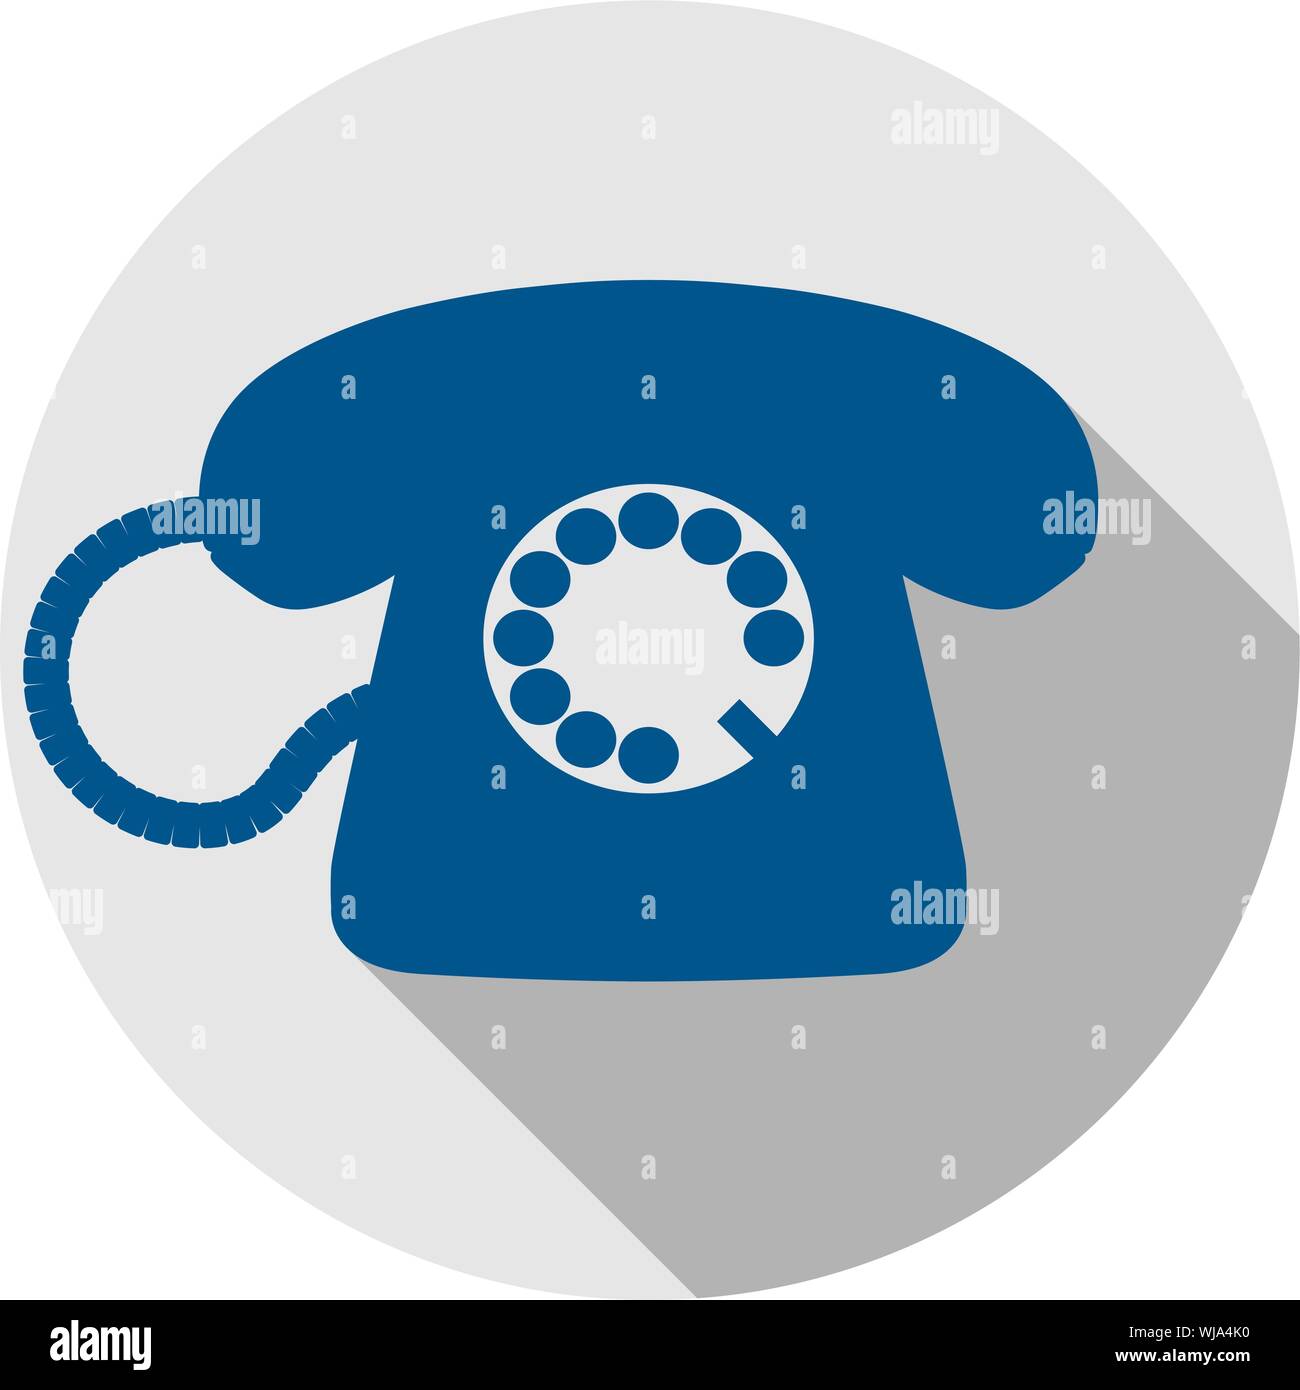 rotary dial operated telephone icon or symbol vector illustration Stock Vector